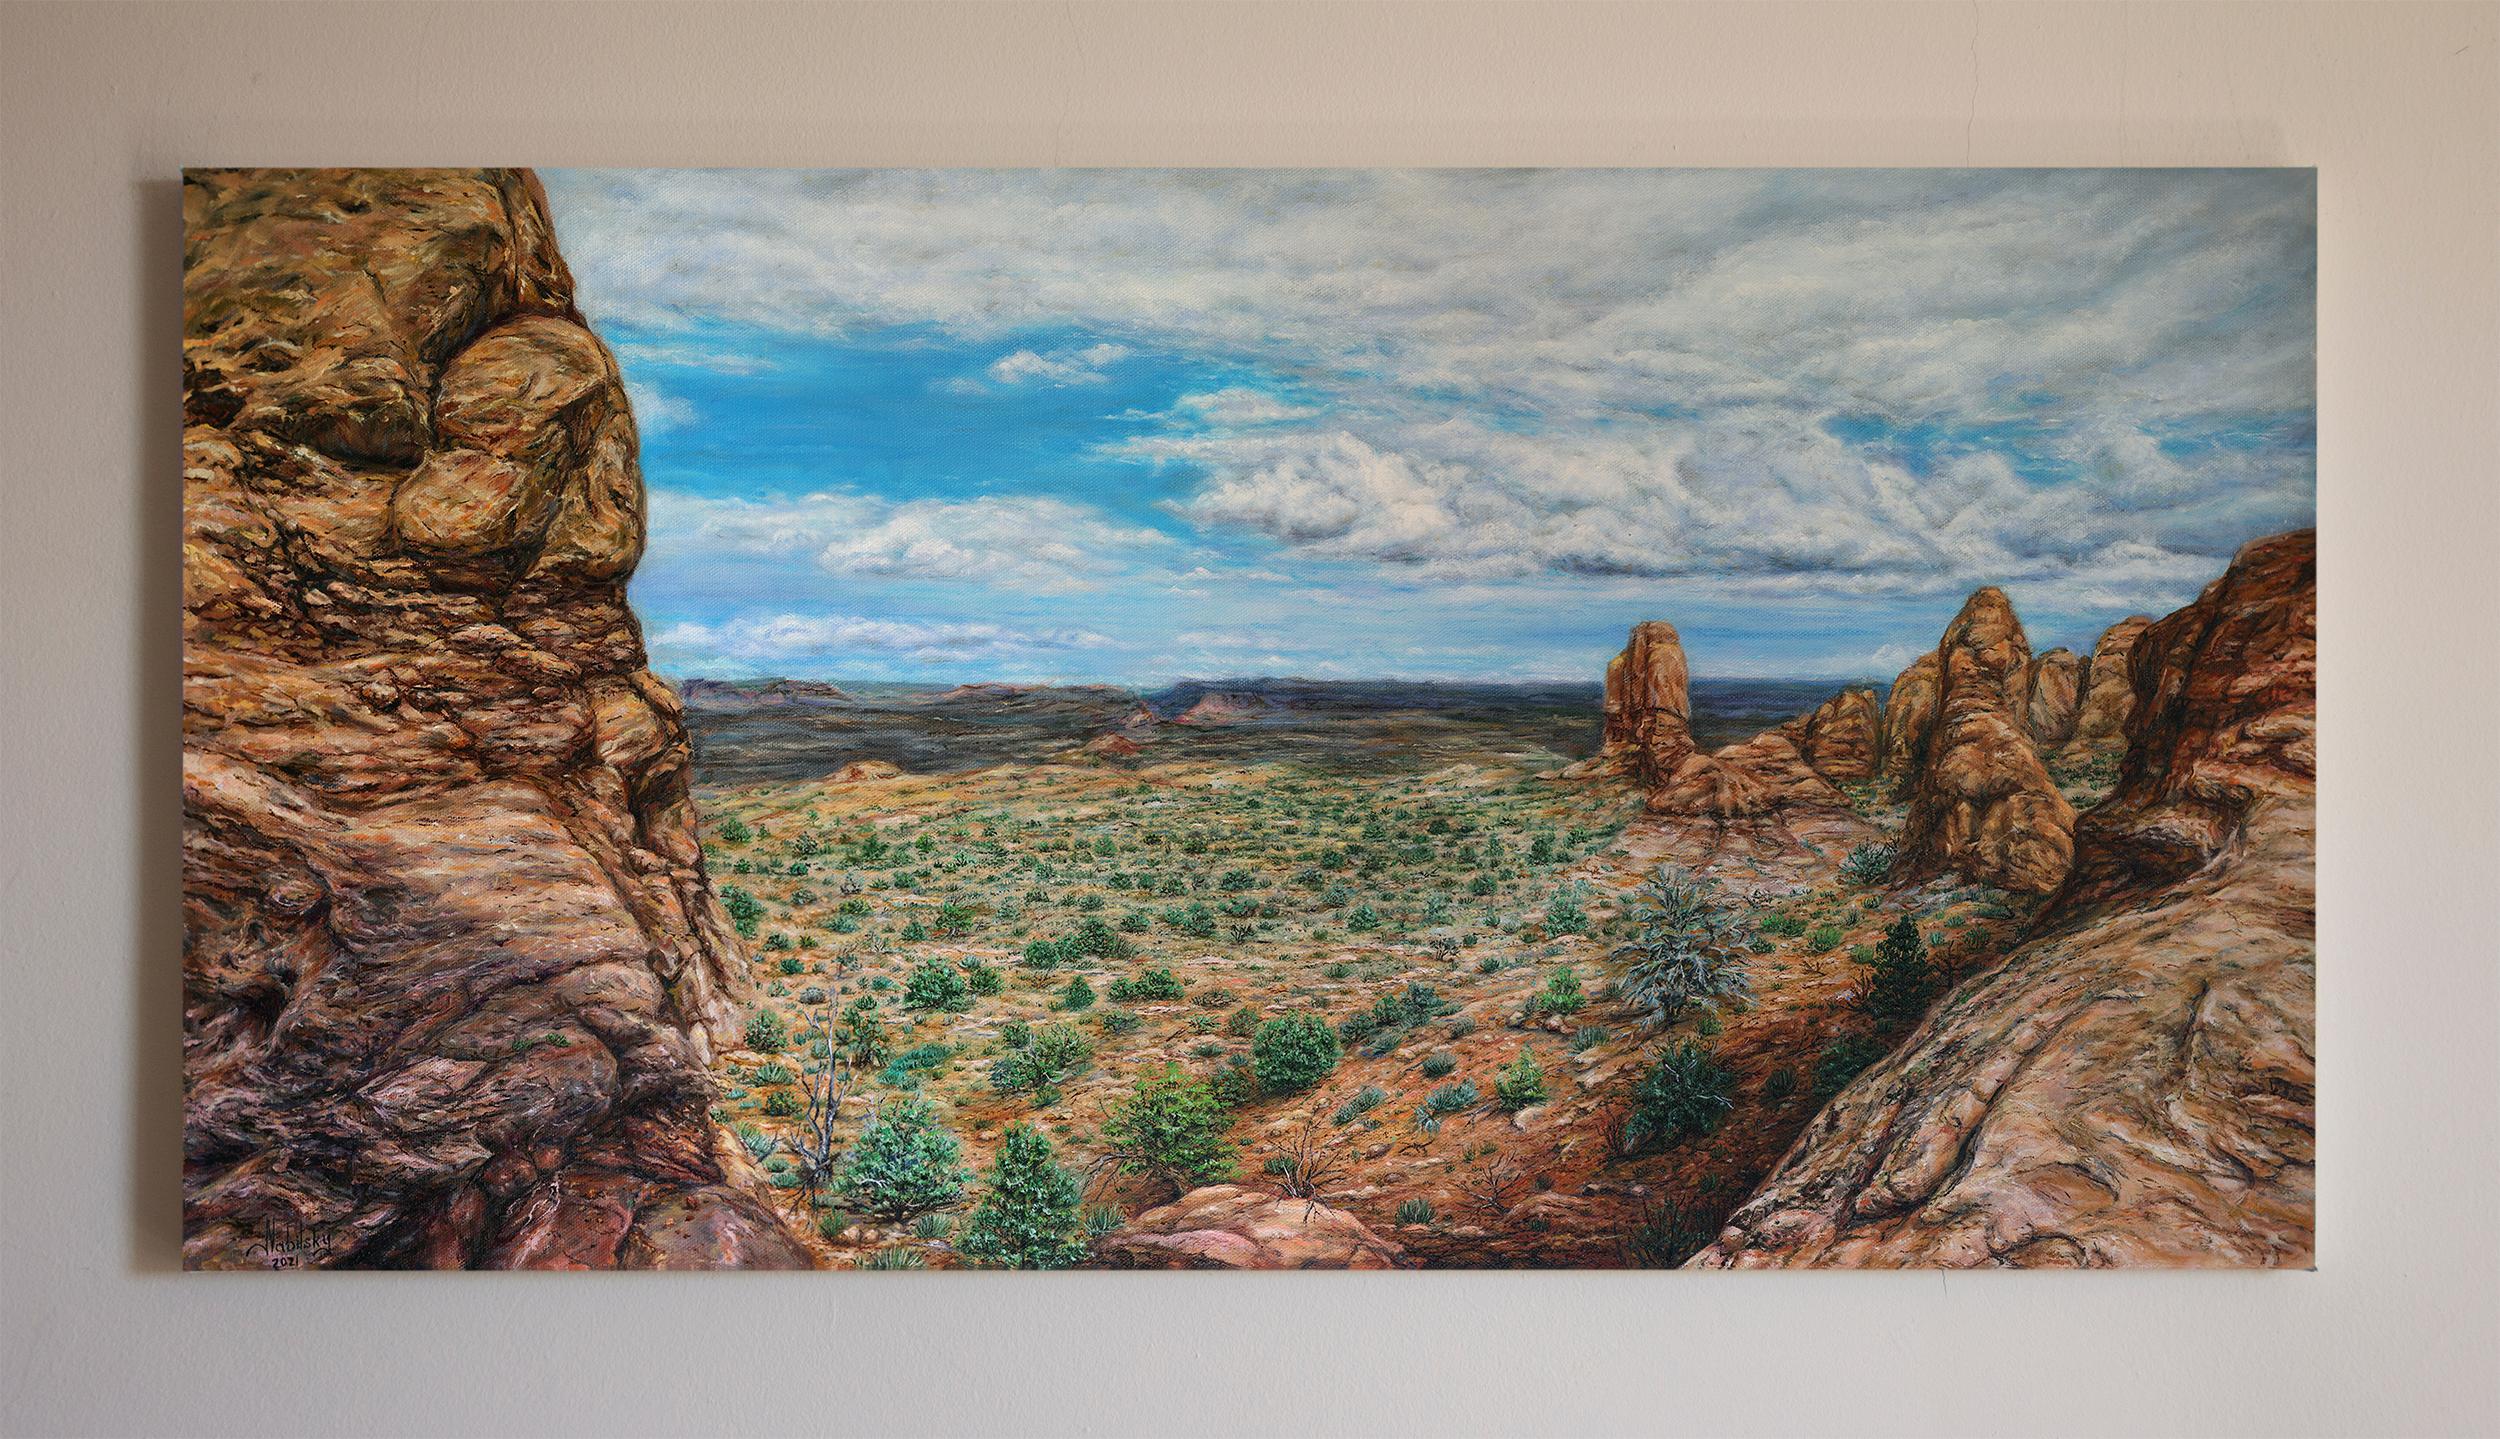 <p>Artist Comments<br>Artist Olena Nabilsky draws inspiration from the vast expanse of open space to create a stunning depiction of a rocky valley in Arizona. The colors and sharp details of the natural elements perfectly capture the vibrancy and